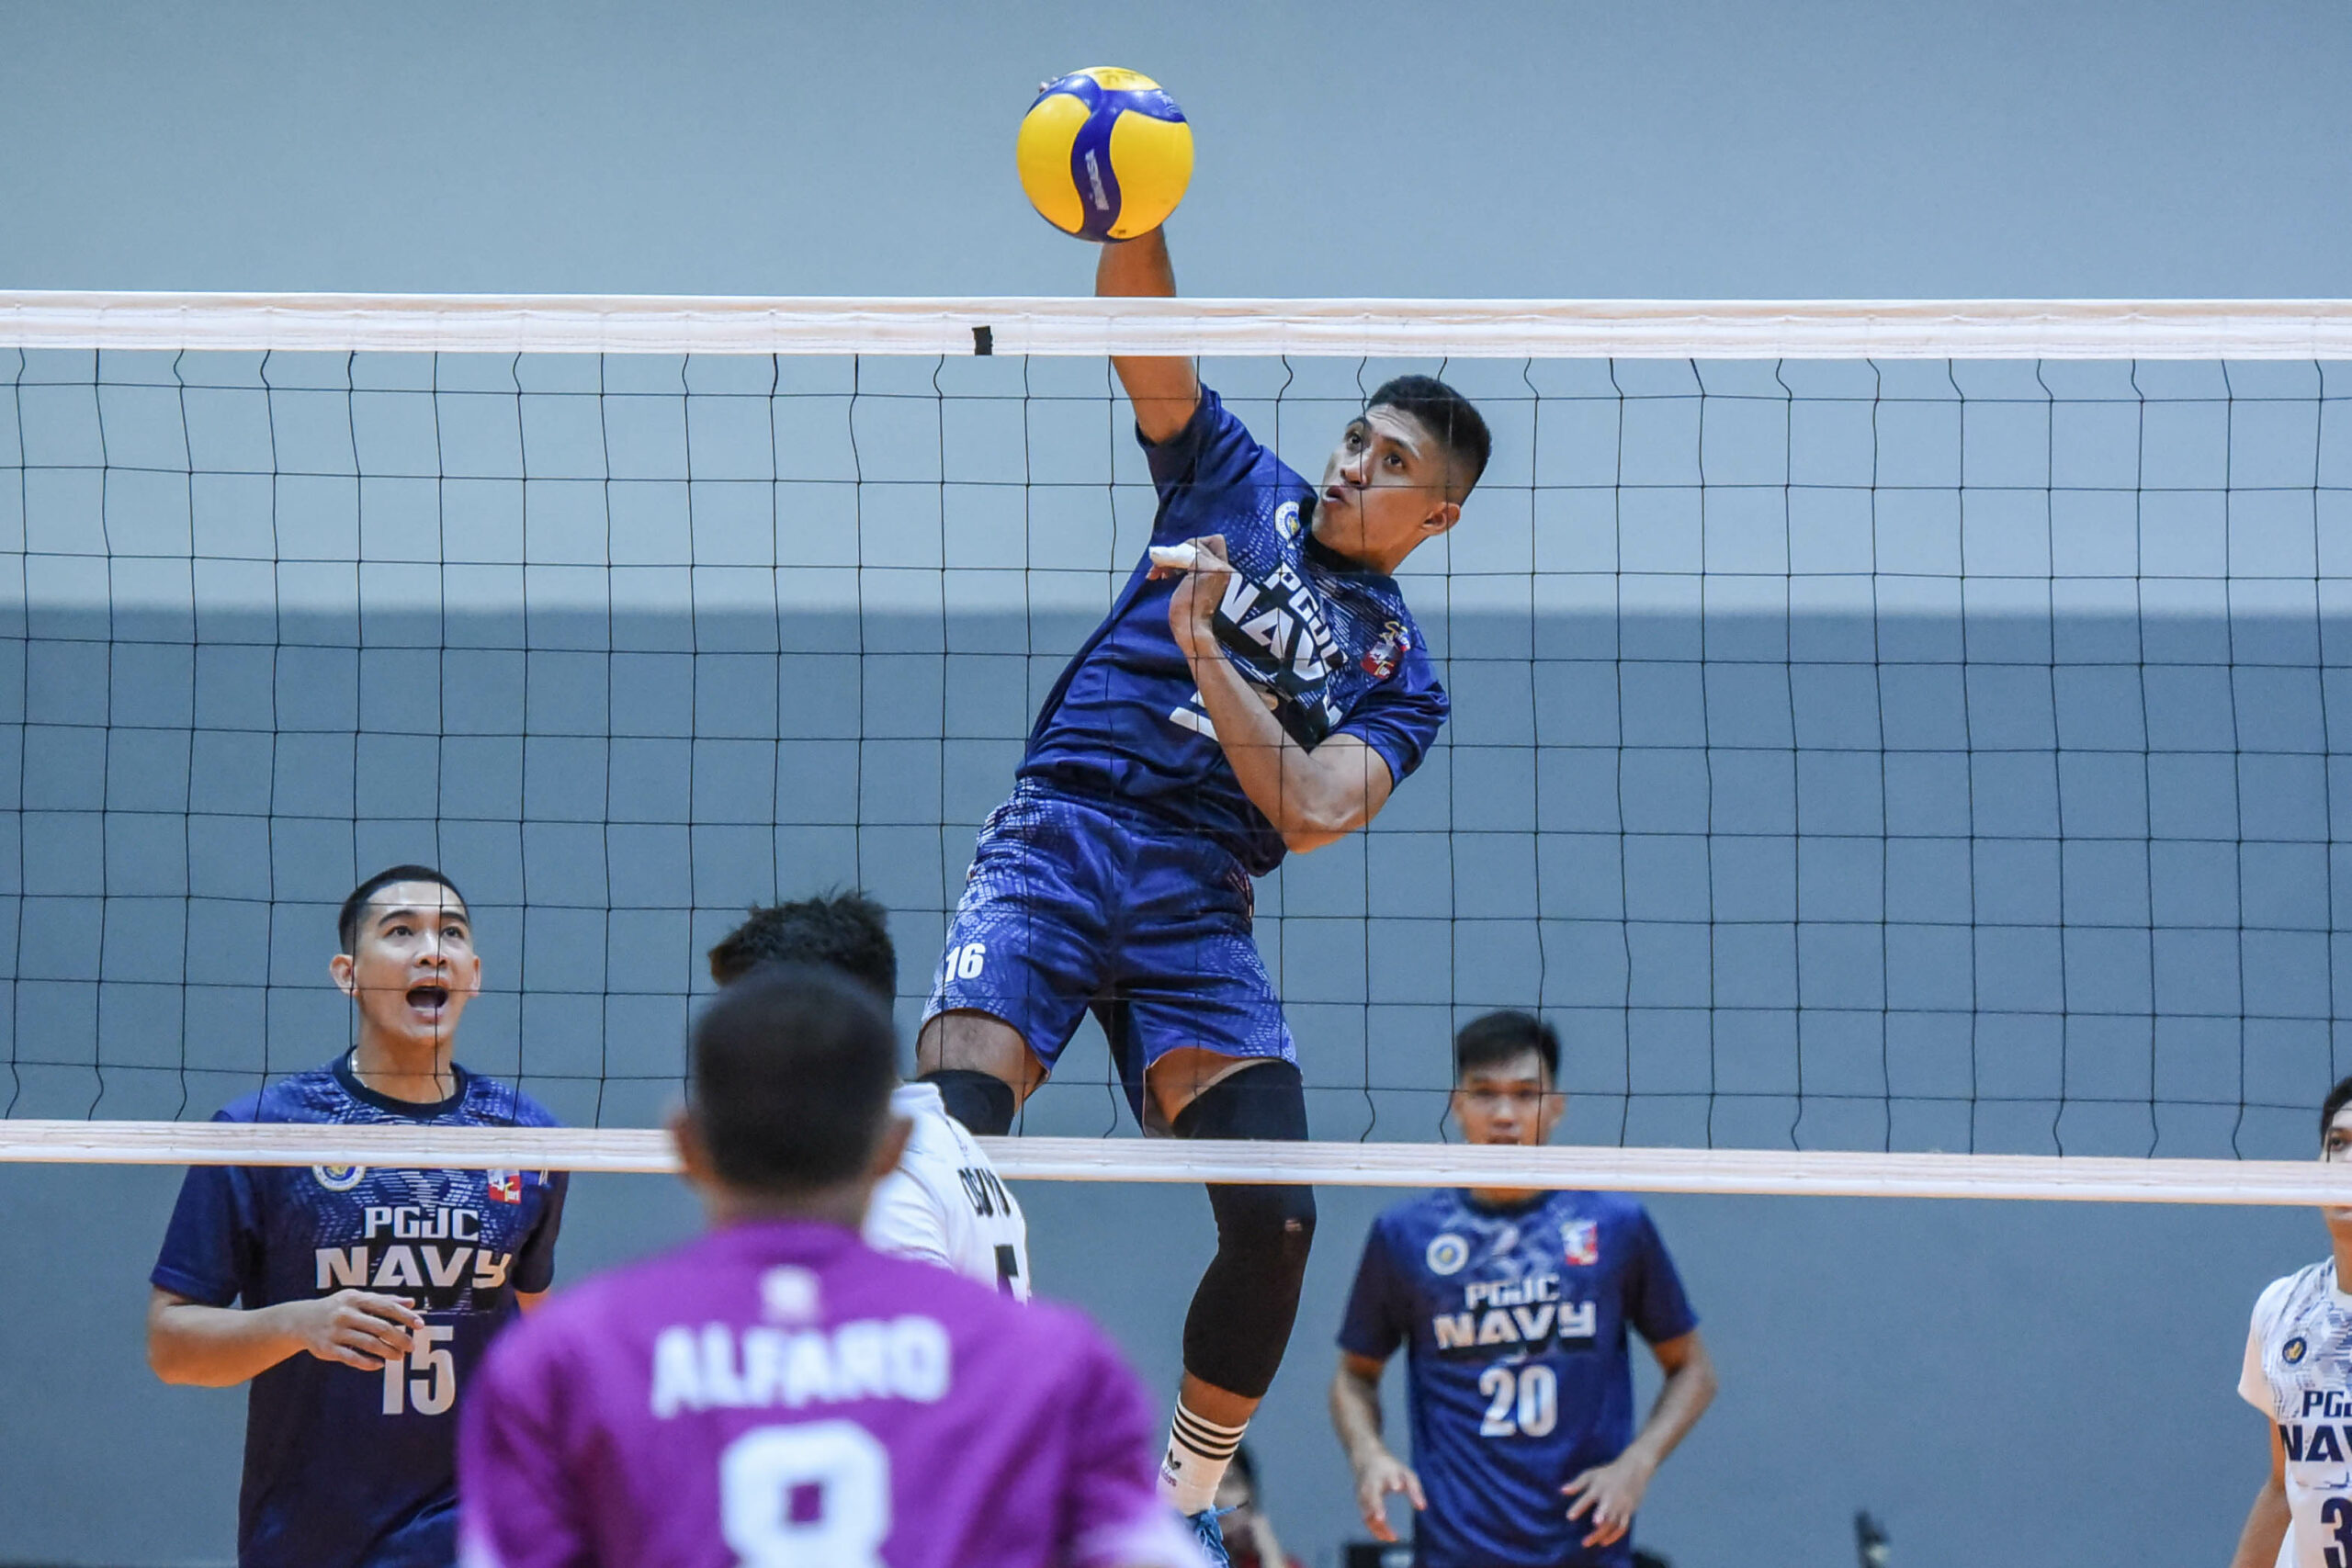 ST-2023-Navy-vs.-APH-Greg-Dolor-7133-scaled Perpetual-Kinto, PGJC-Navy complete Spikers Turf quarters cast CSB News Spikers' Turf UPHSD Volleyball  - philippine sports news